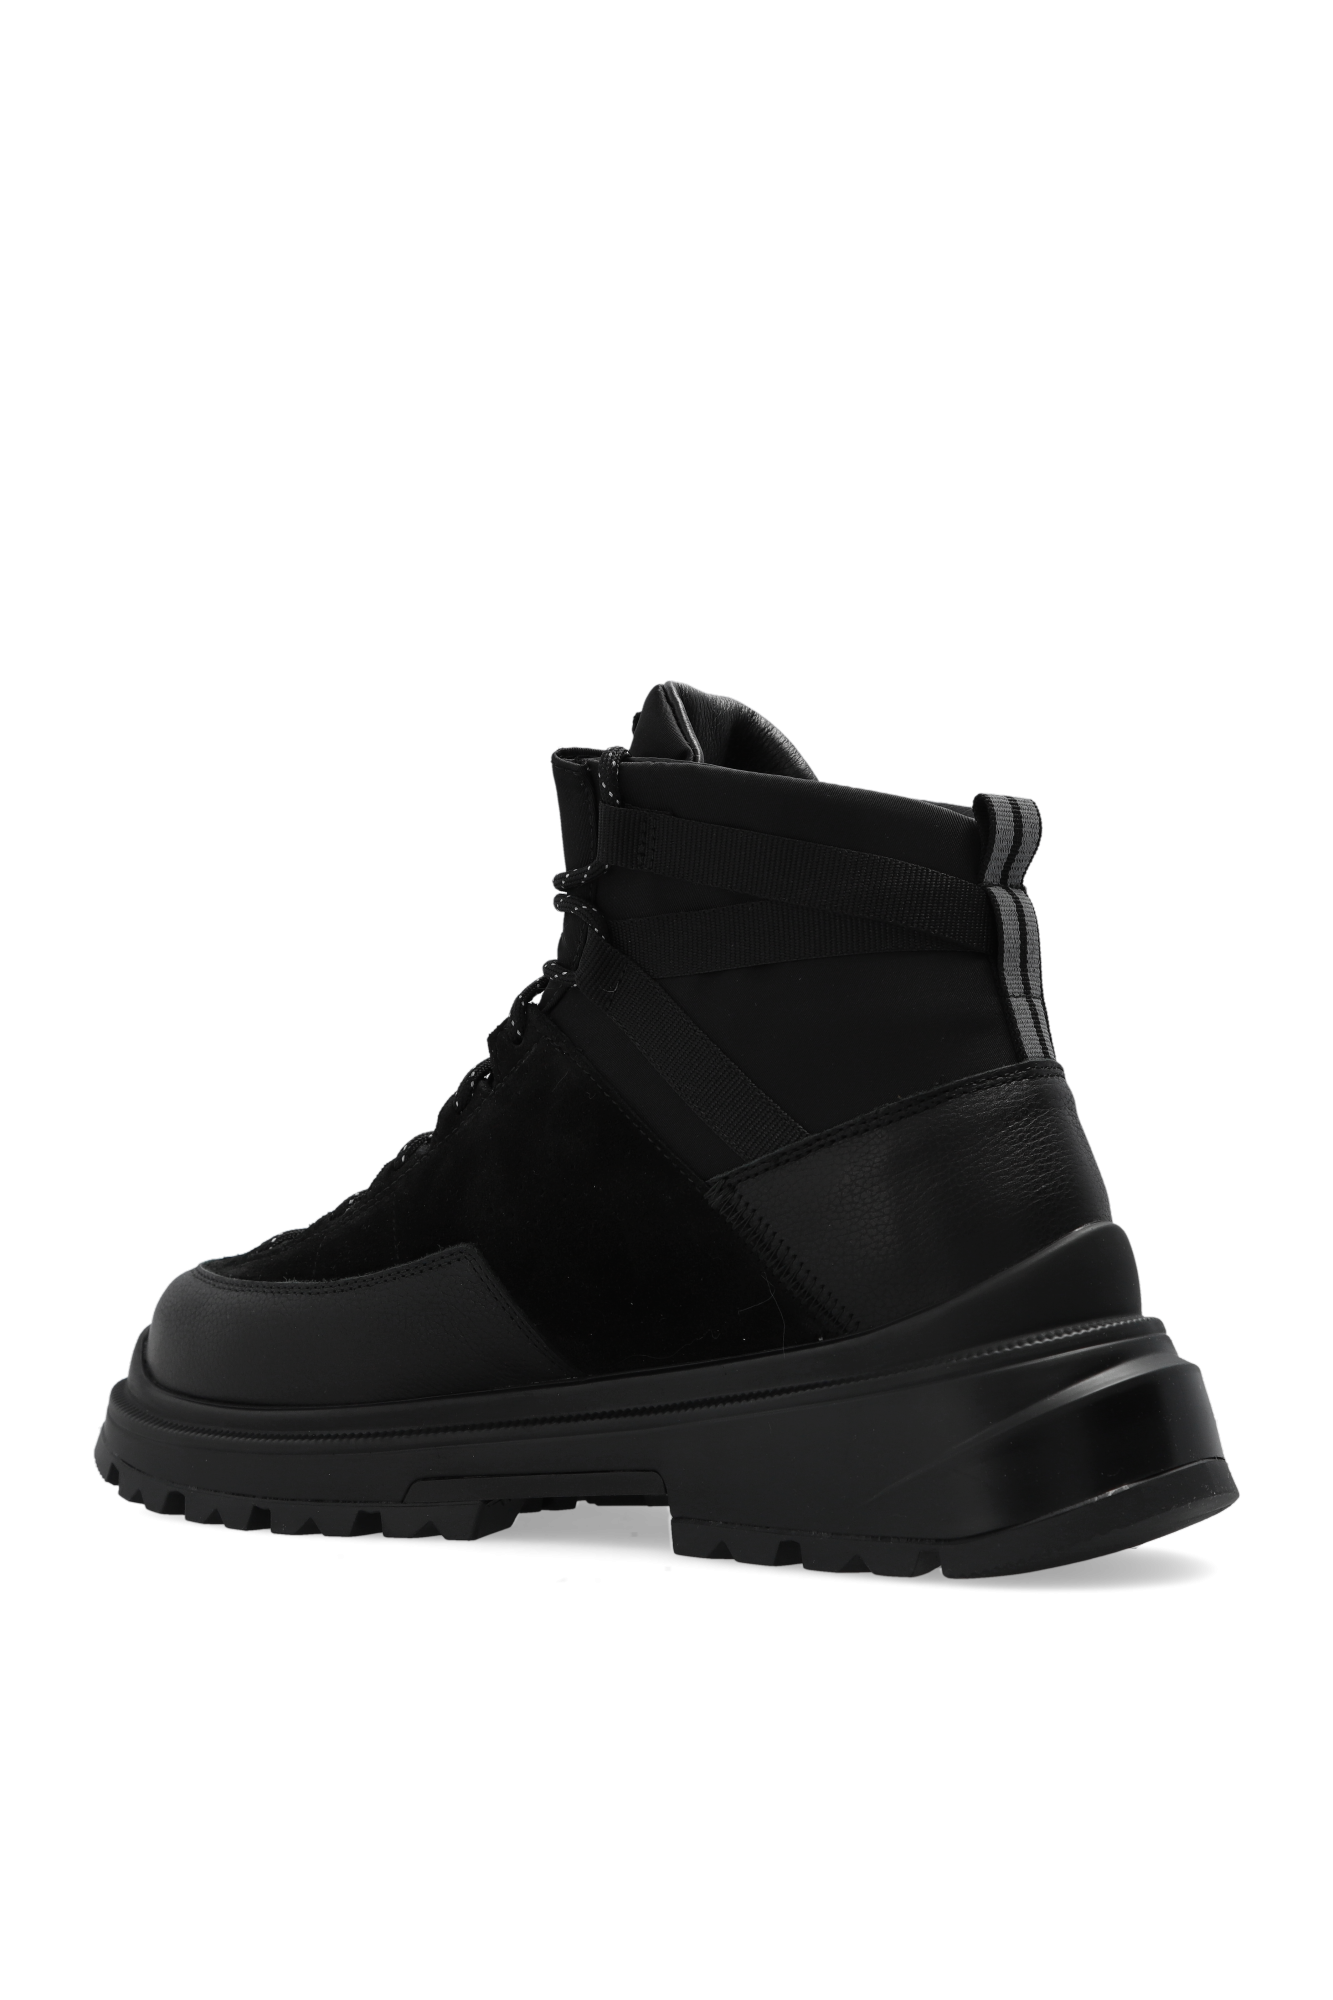 Canada Goose ‘Journey Lite’ boots